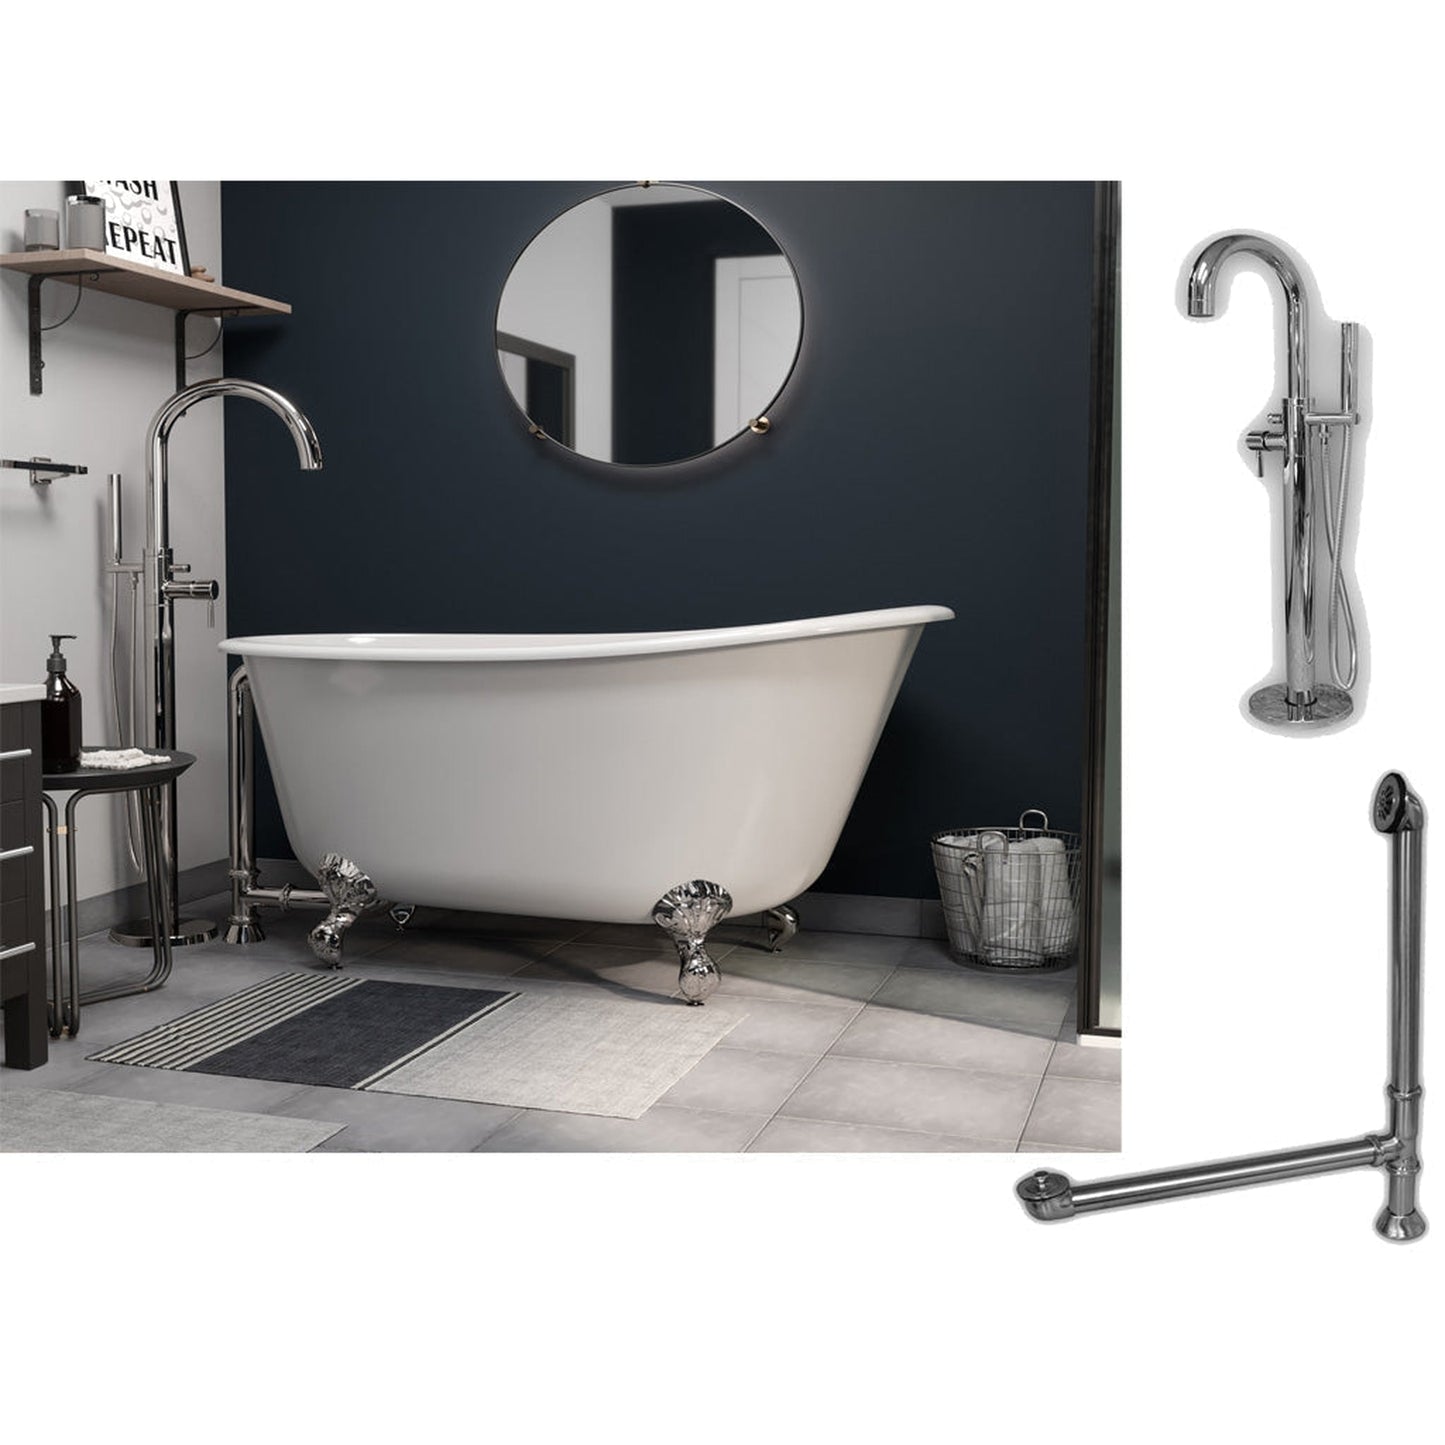 Cambridge Plumbing 58" White Cast Iron Swedish Single Slipper Clawfoot Bathtub With No Deck Holes And Complete Plumbing Package Including Modern Floor Mounted Faucet, Drain And Overflow Assembly In Oil Rubbed Bronze